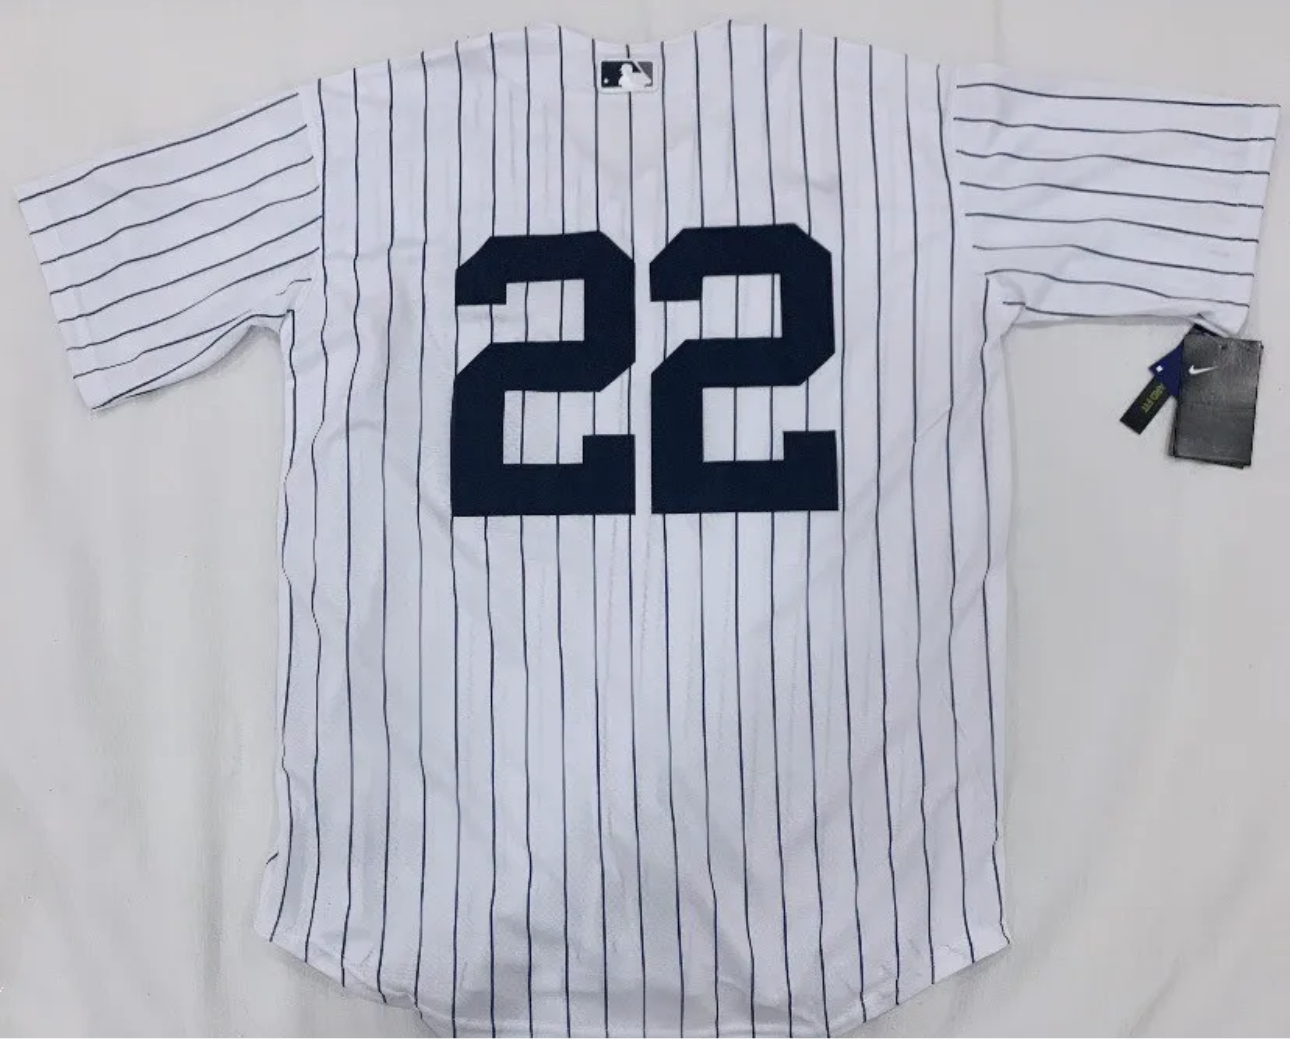 Juan Soto New York Yankees MLB Official Home Pinstripe Player Jersey - No Name